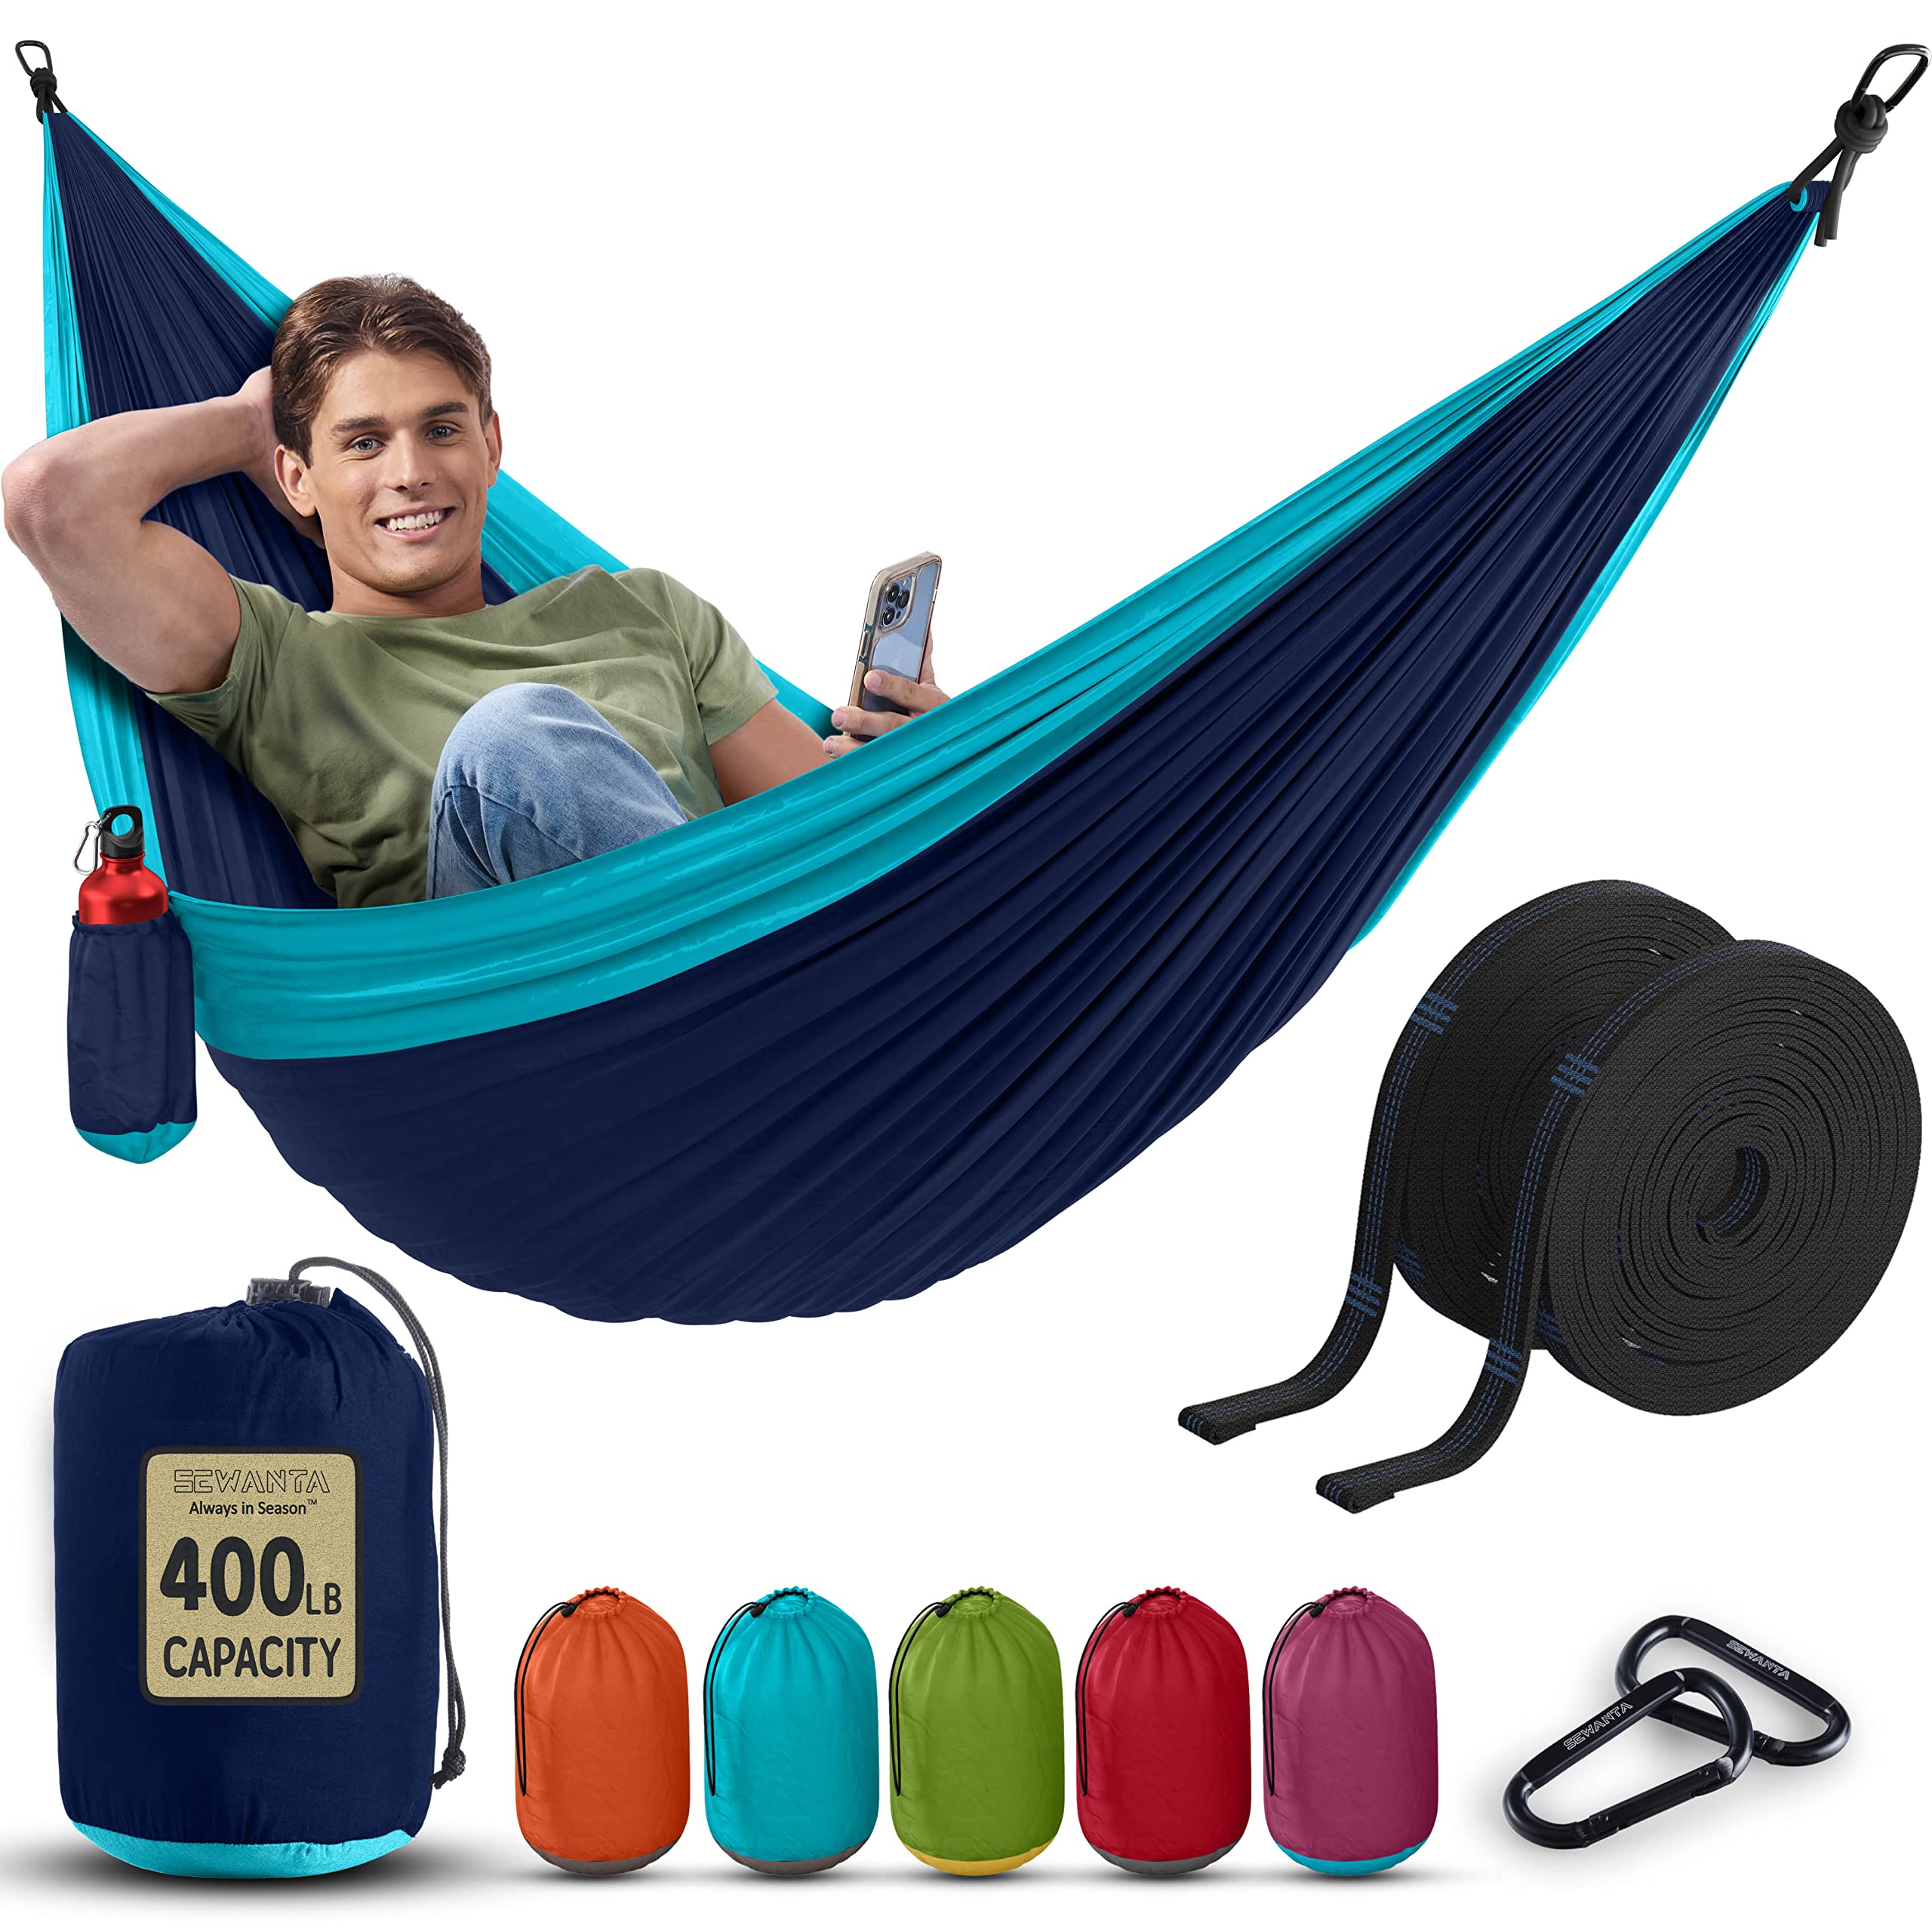 Sewanta Durable Hammock 400 lb capacity - Lightweight Nylon camping Hammock chair - Double or Single Sizes w Tree Straps and Attached ca